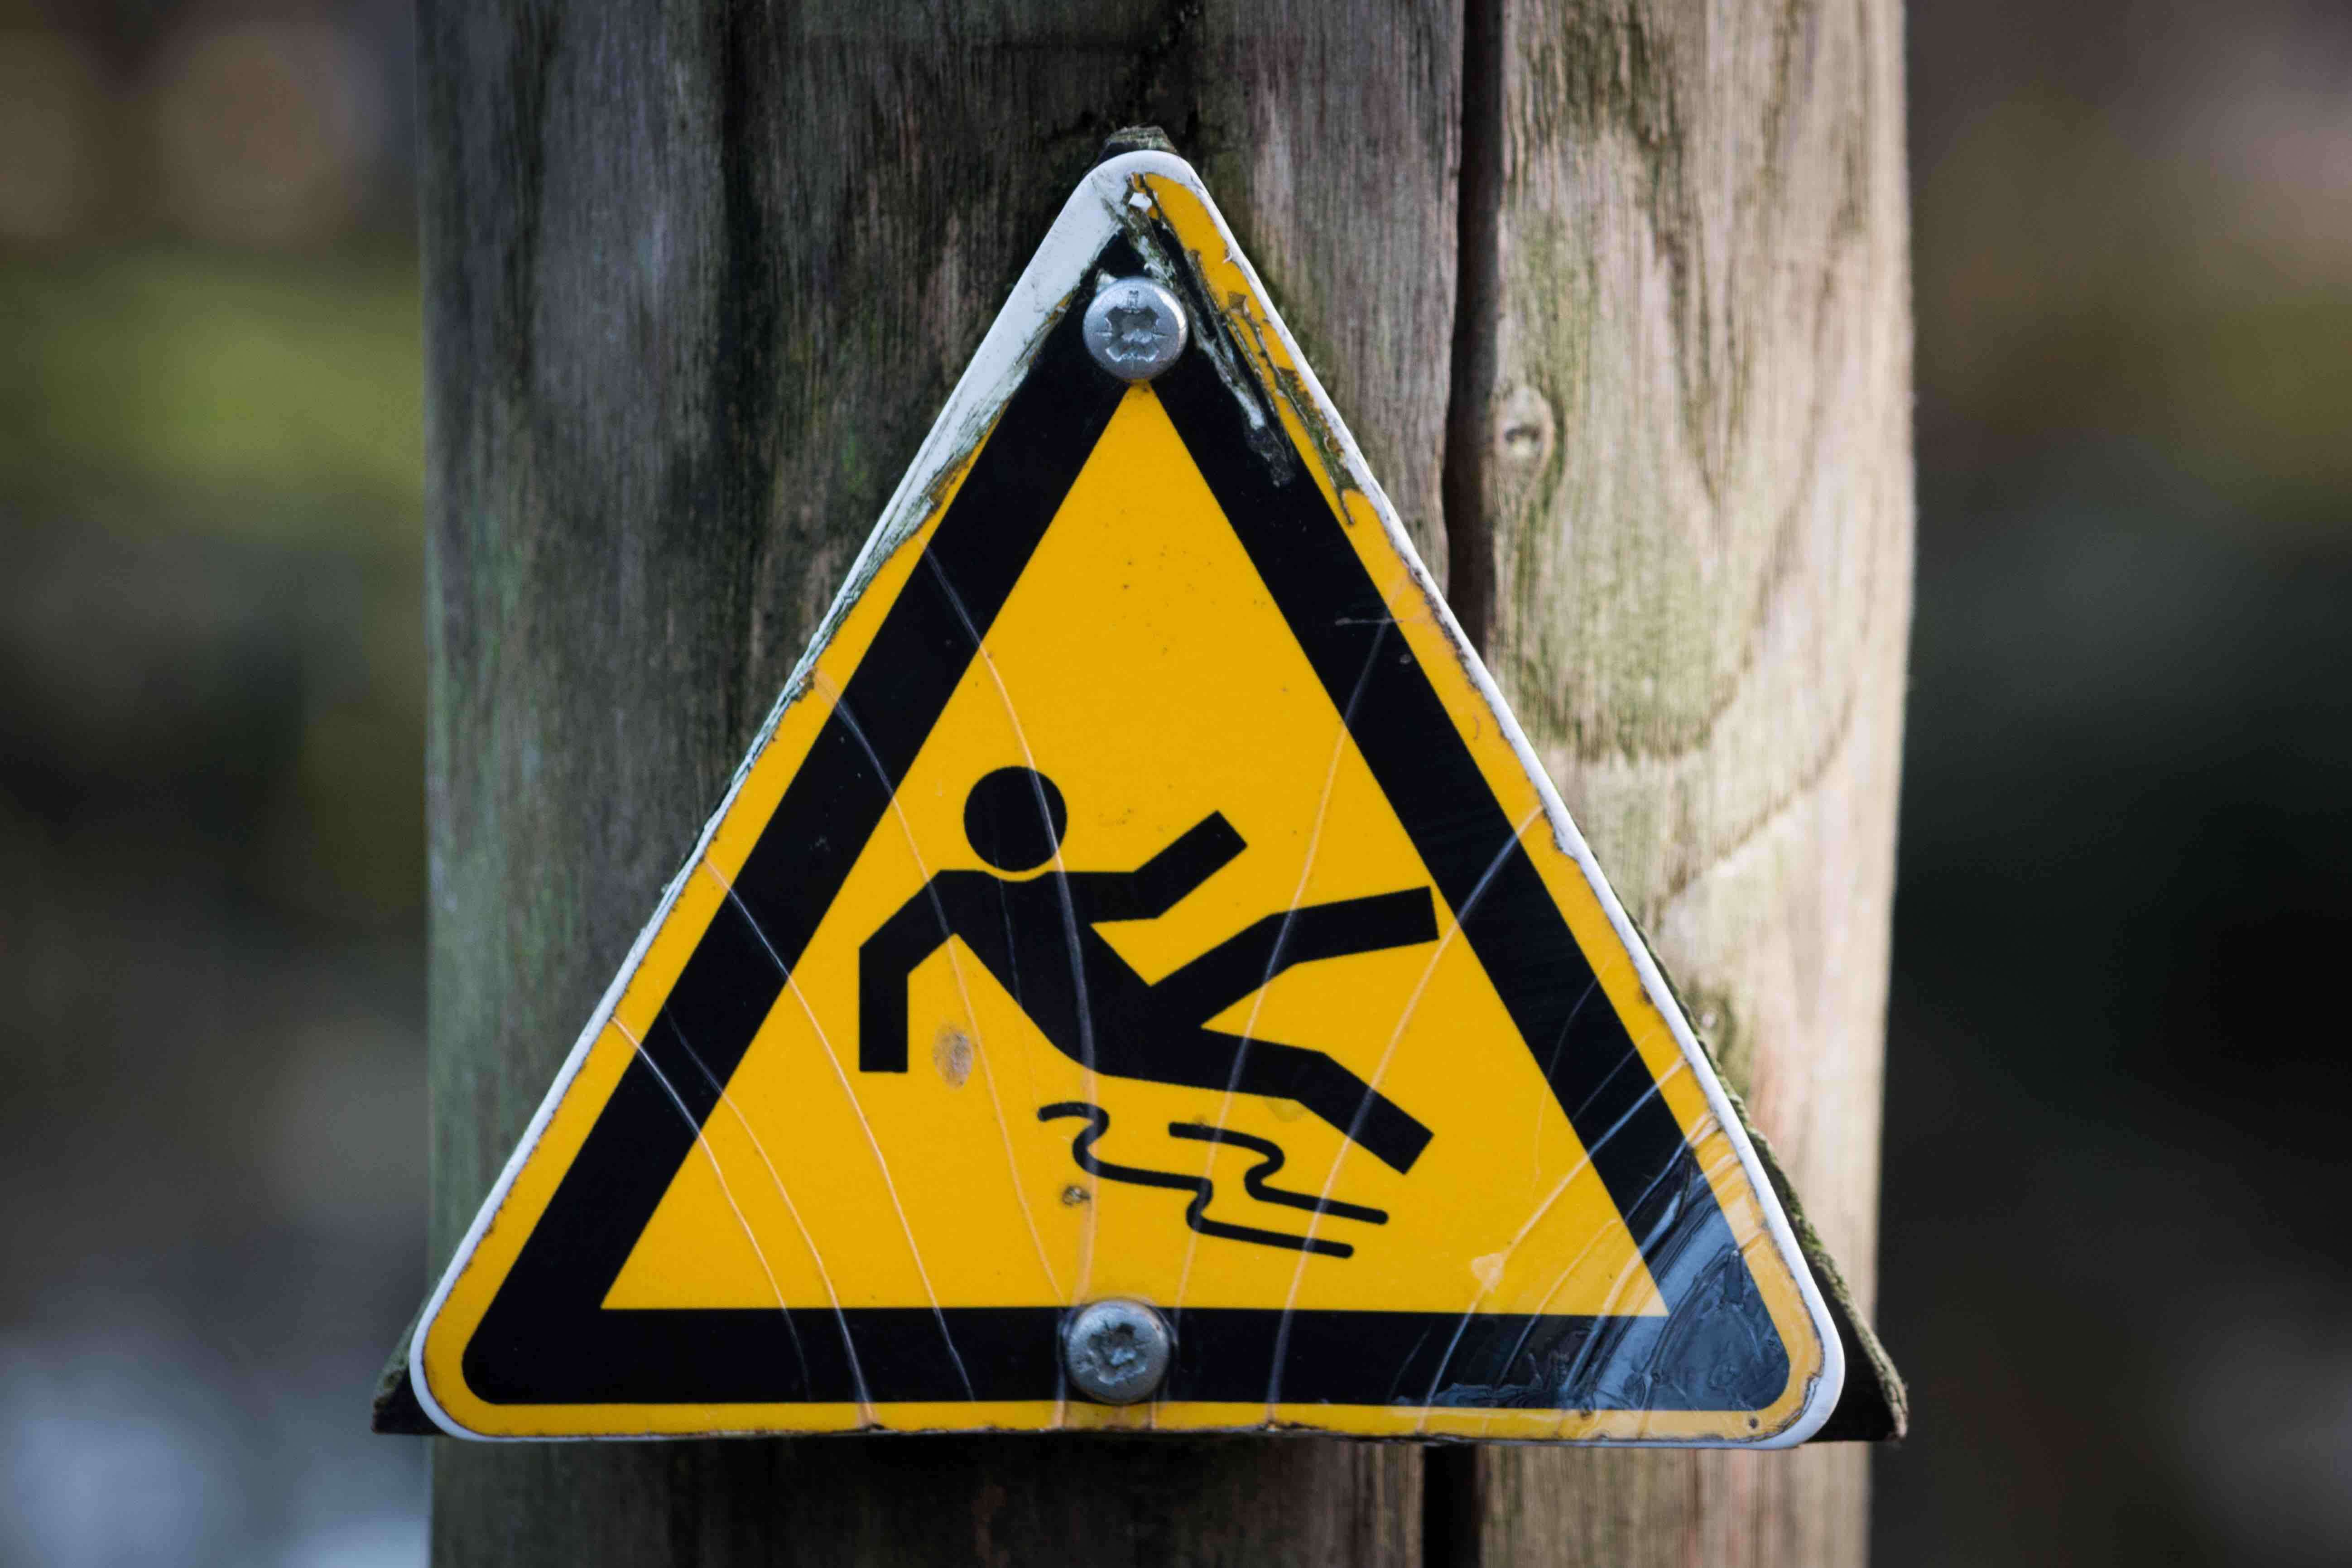 Slip and Fall accidents